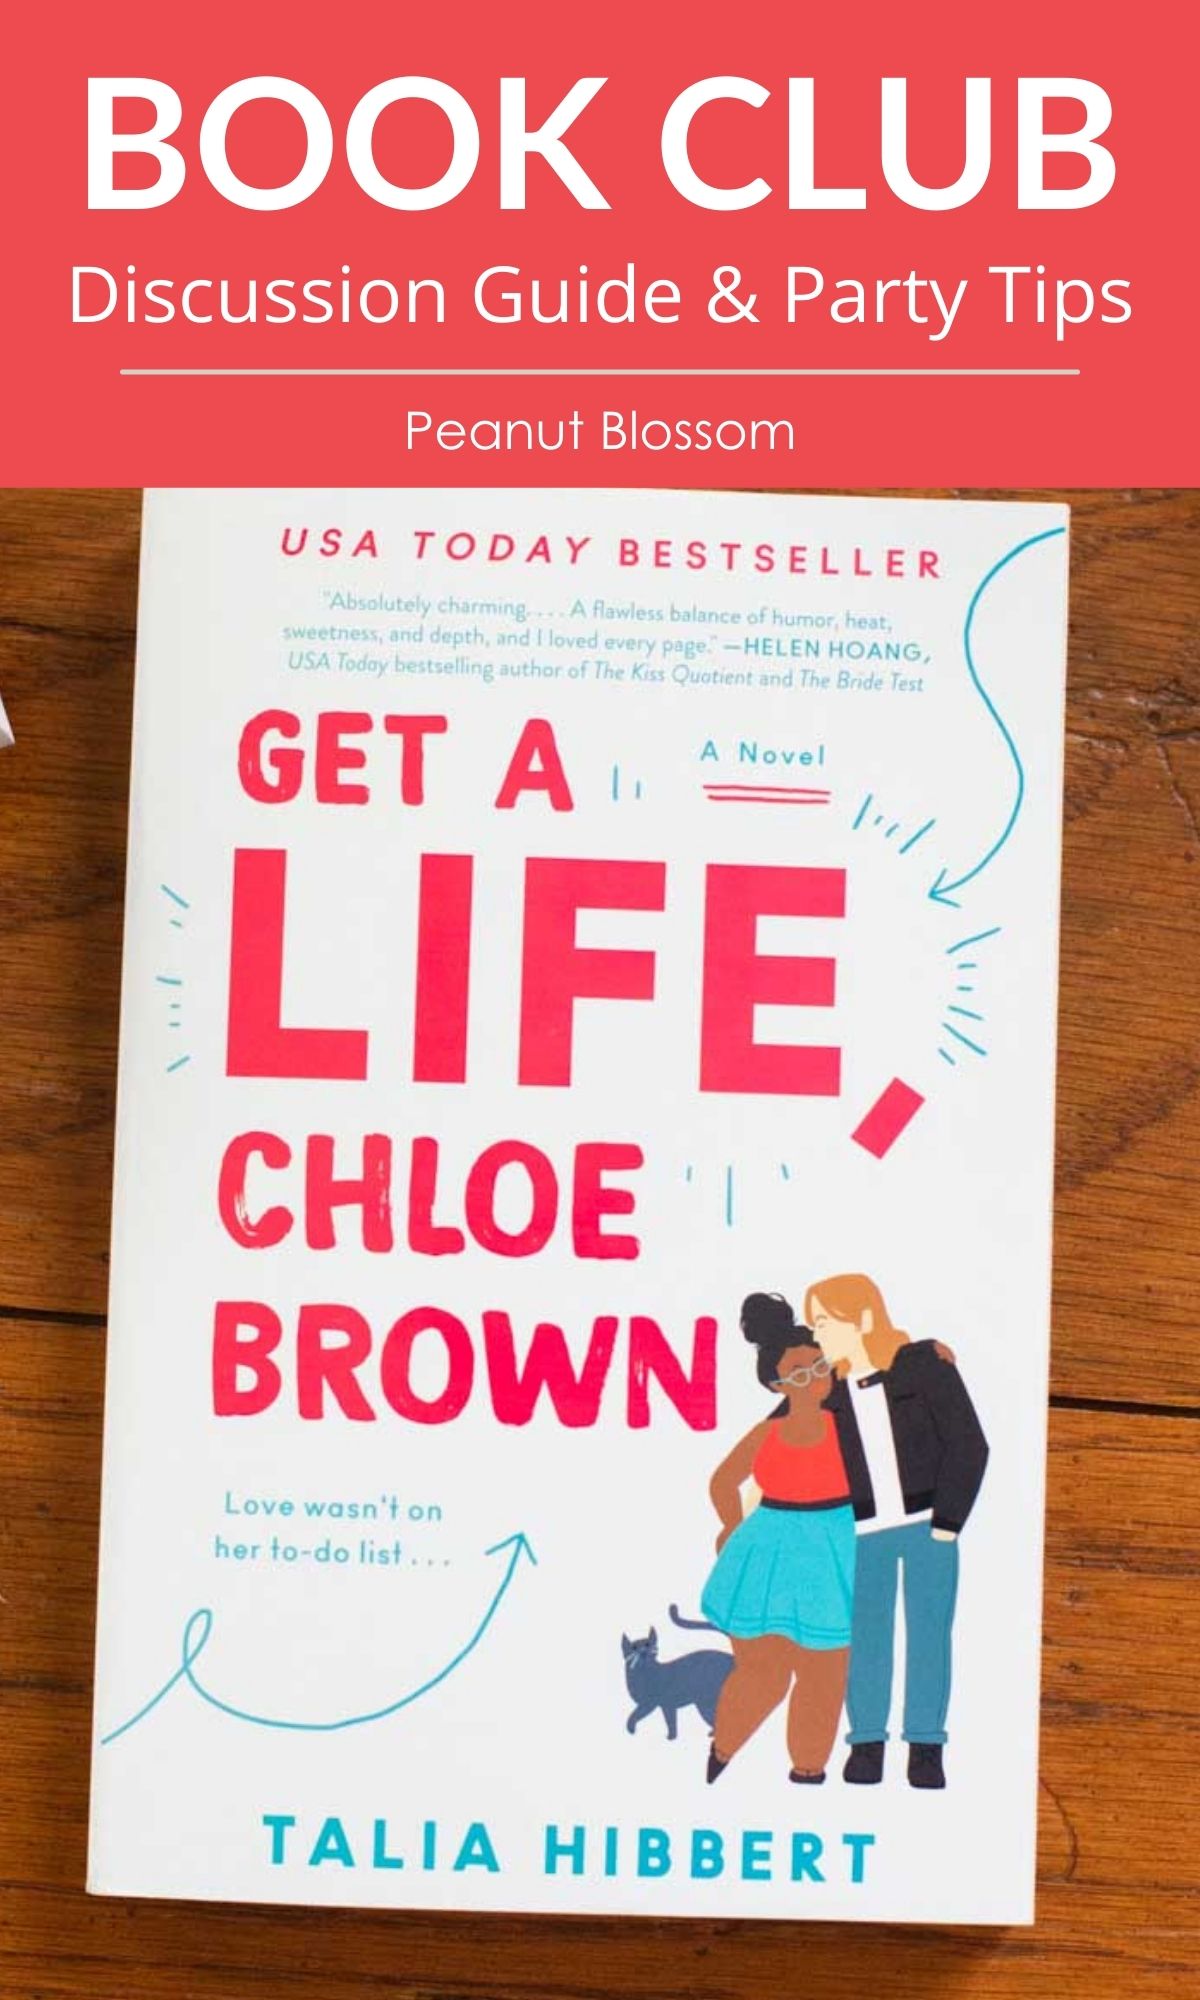 A copy of Get a Life, Chloe Brown by Talia Hibbert is on the table.